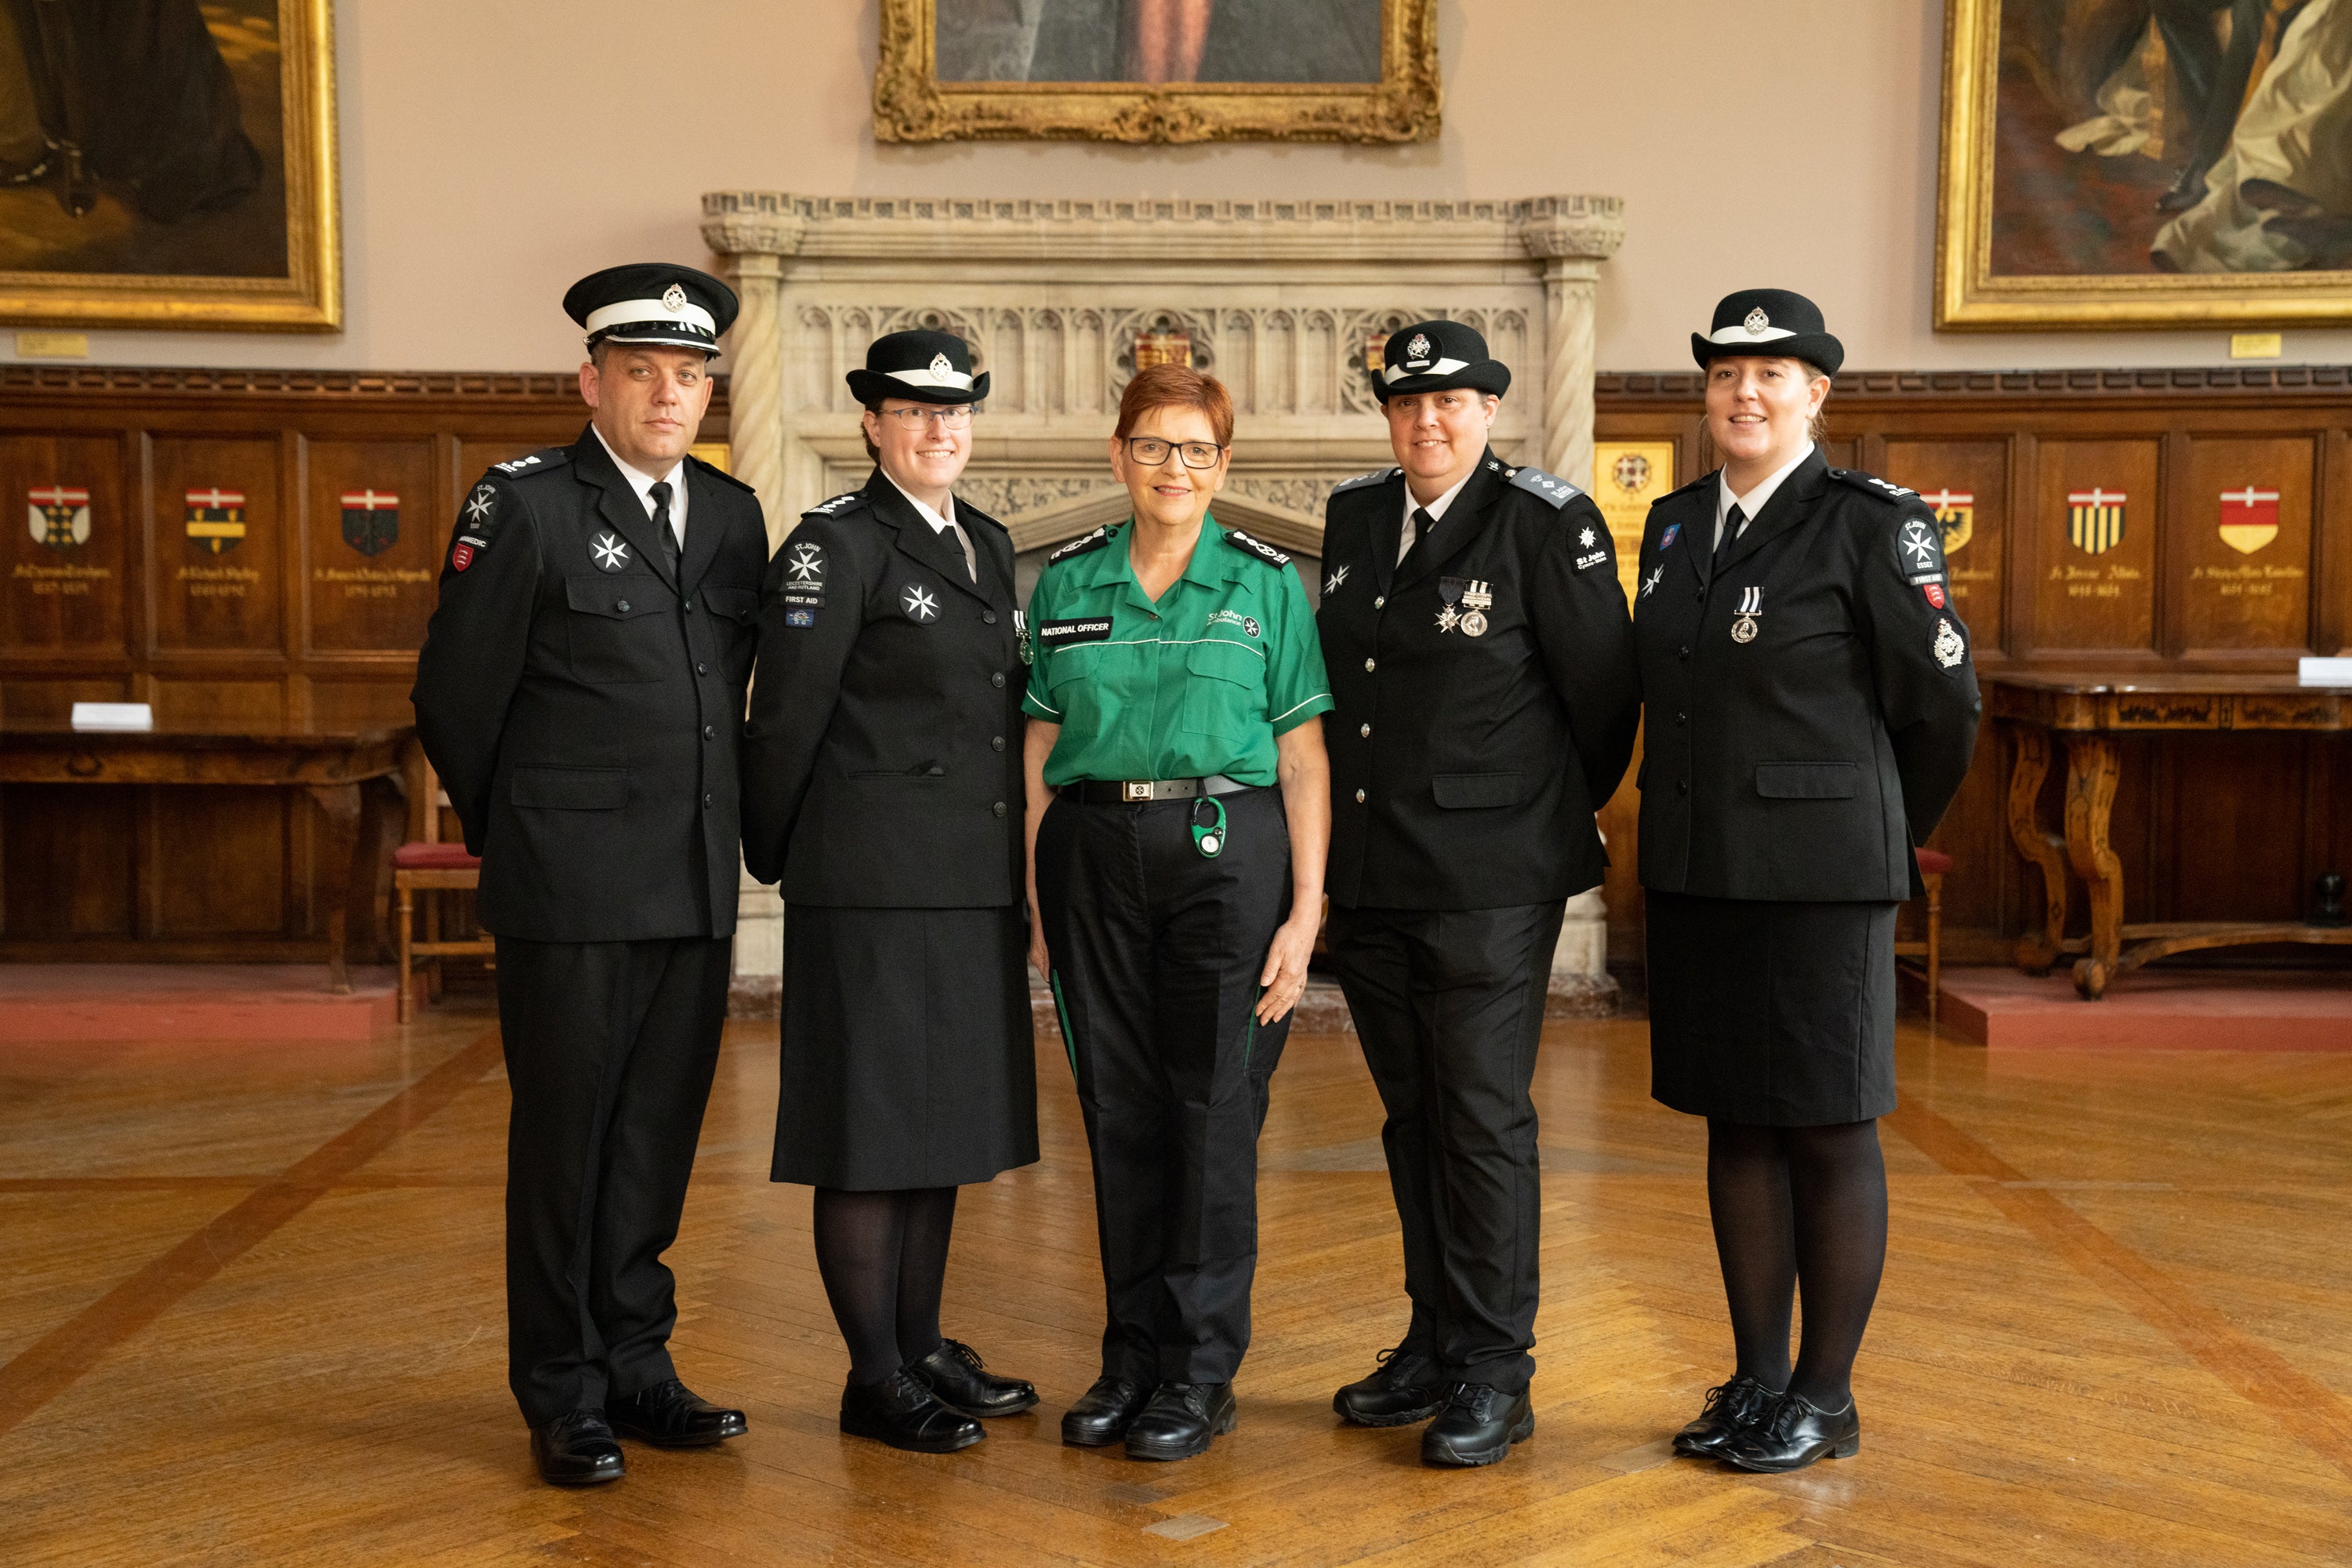 Volunteers Lee Devall and Diana Martin, St John Ambulance’s chief commissioner Ann Cable with volunteers Jane Van-Tiel and Emily Whyte (St John Ambulance)